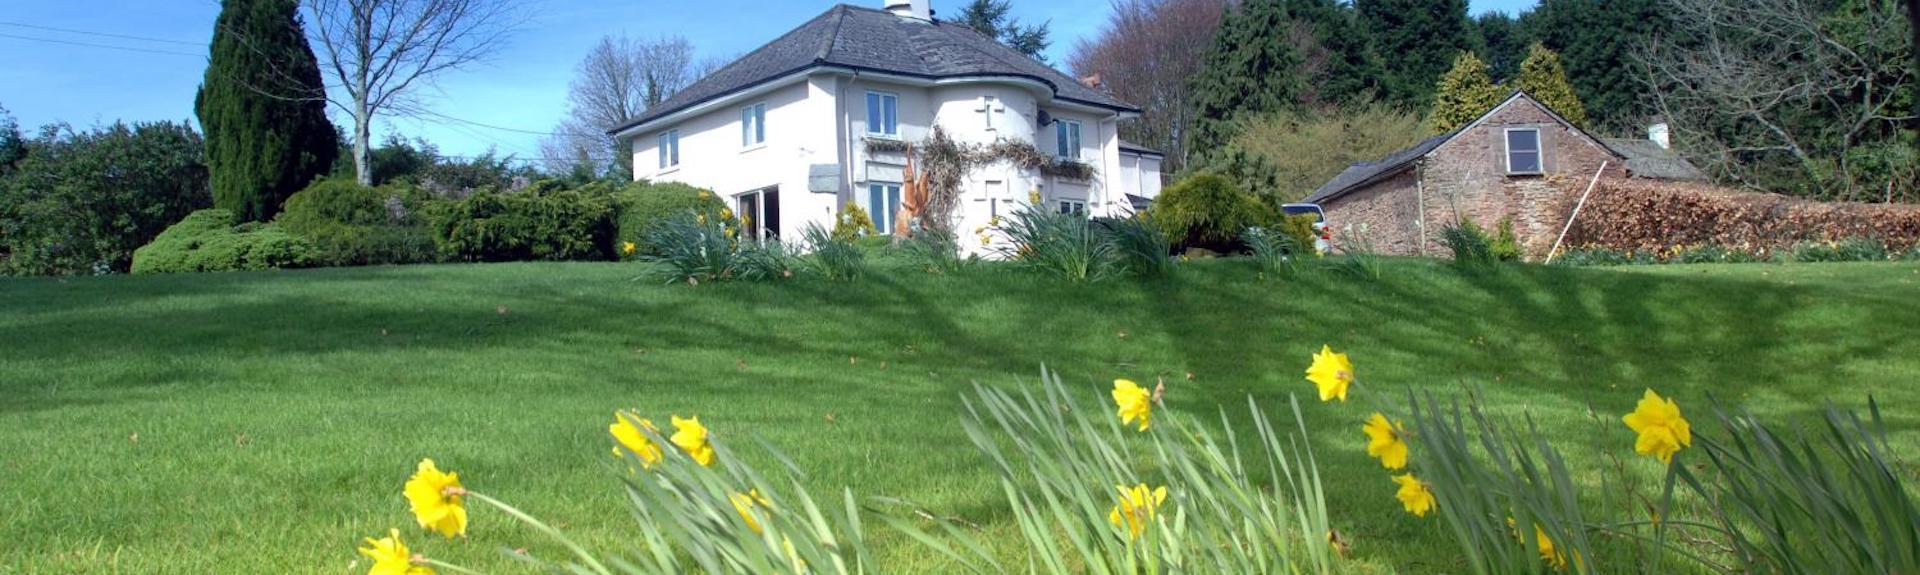 Large country cottage overlooking a daffodil-filled lawn.